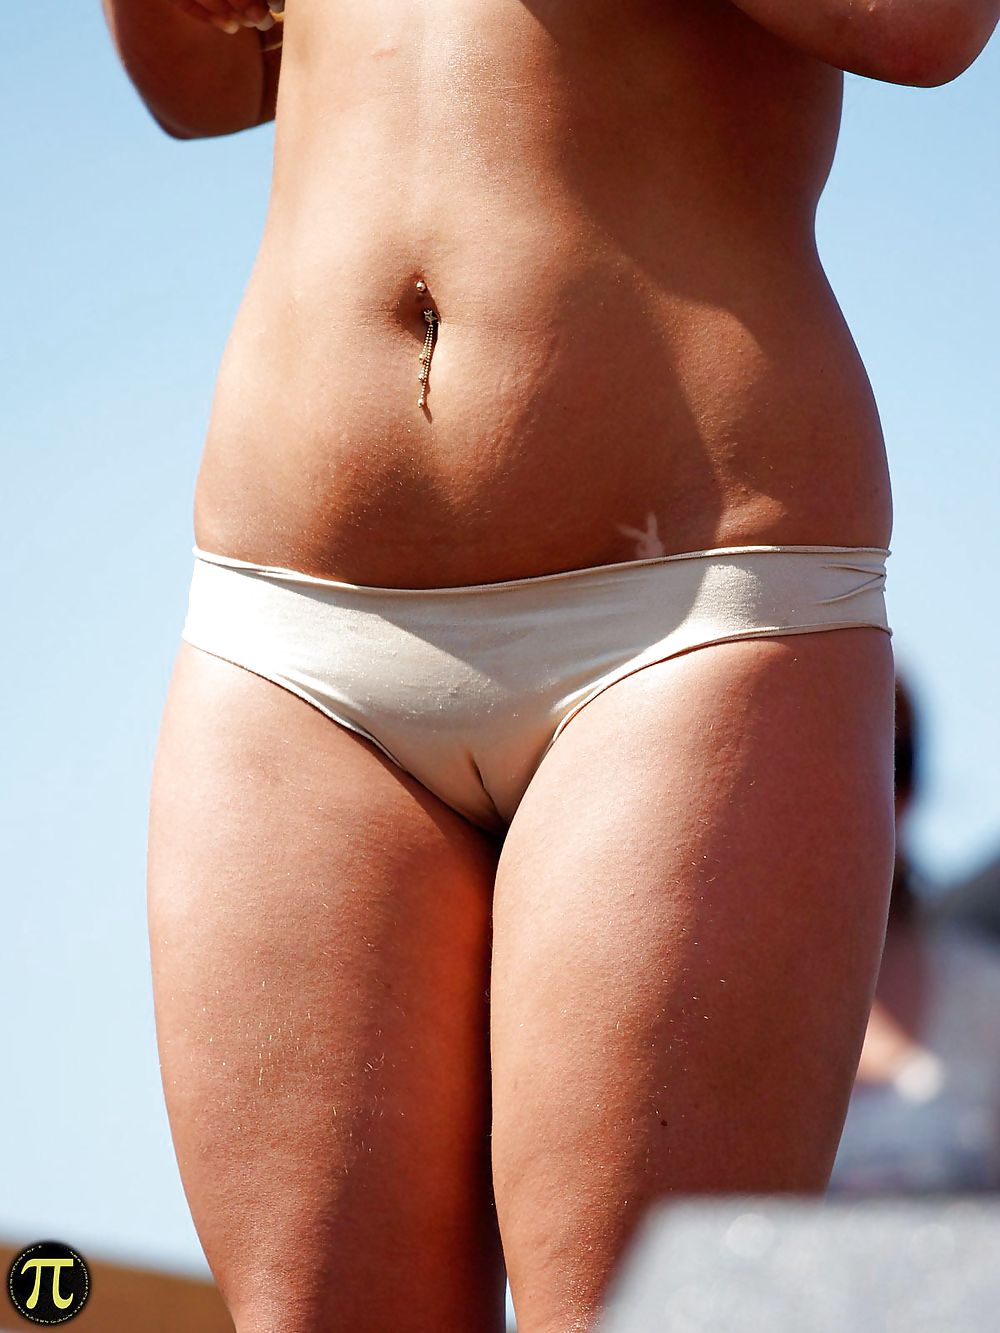 Camel Toe Erotica By twistedworlds #10494734